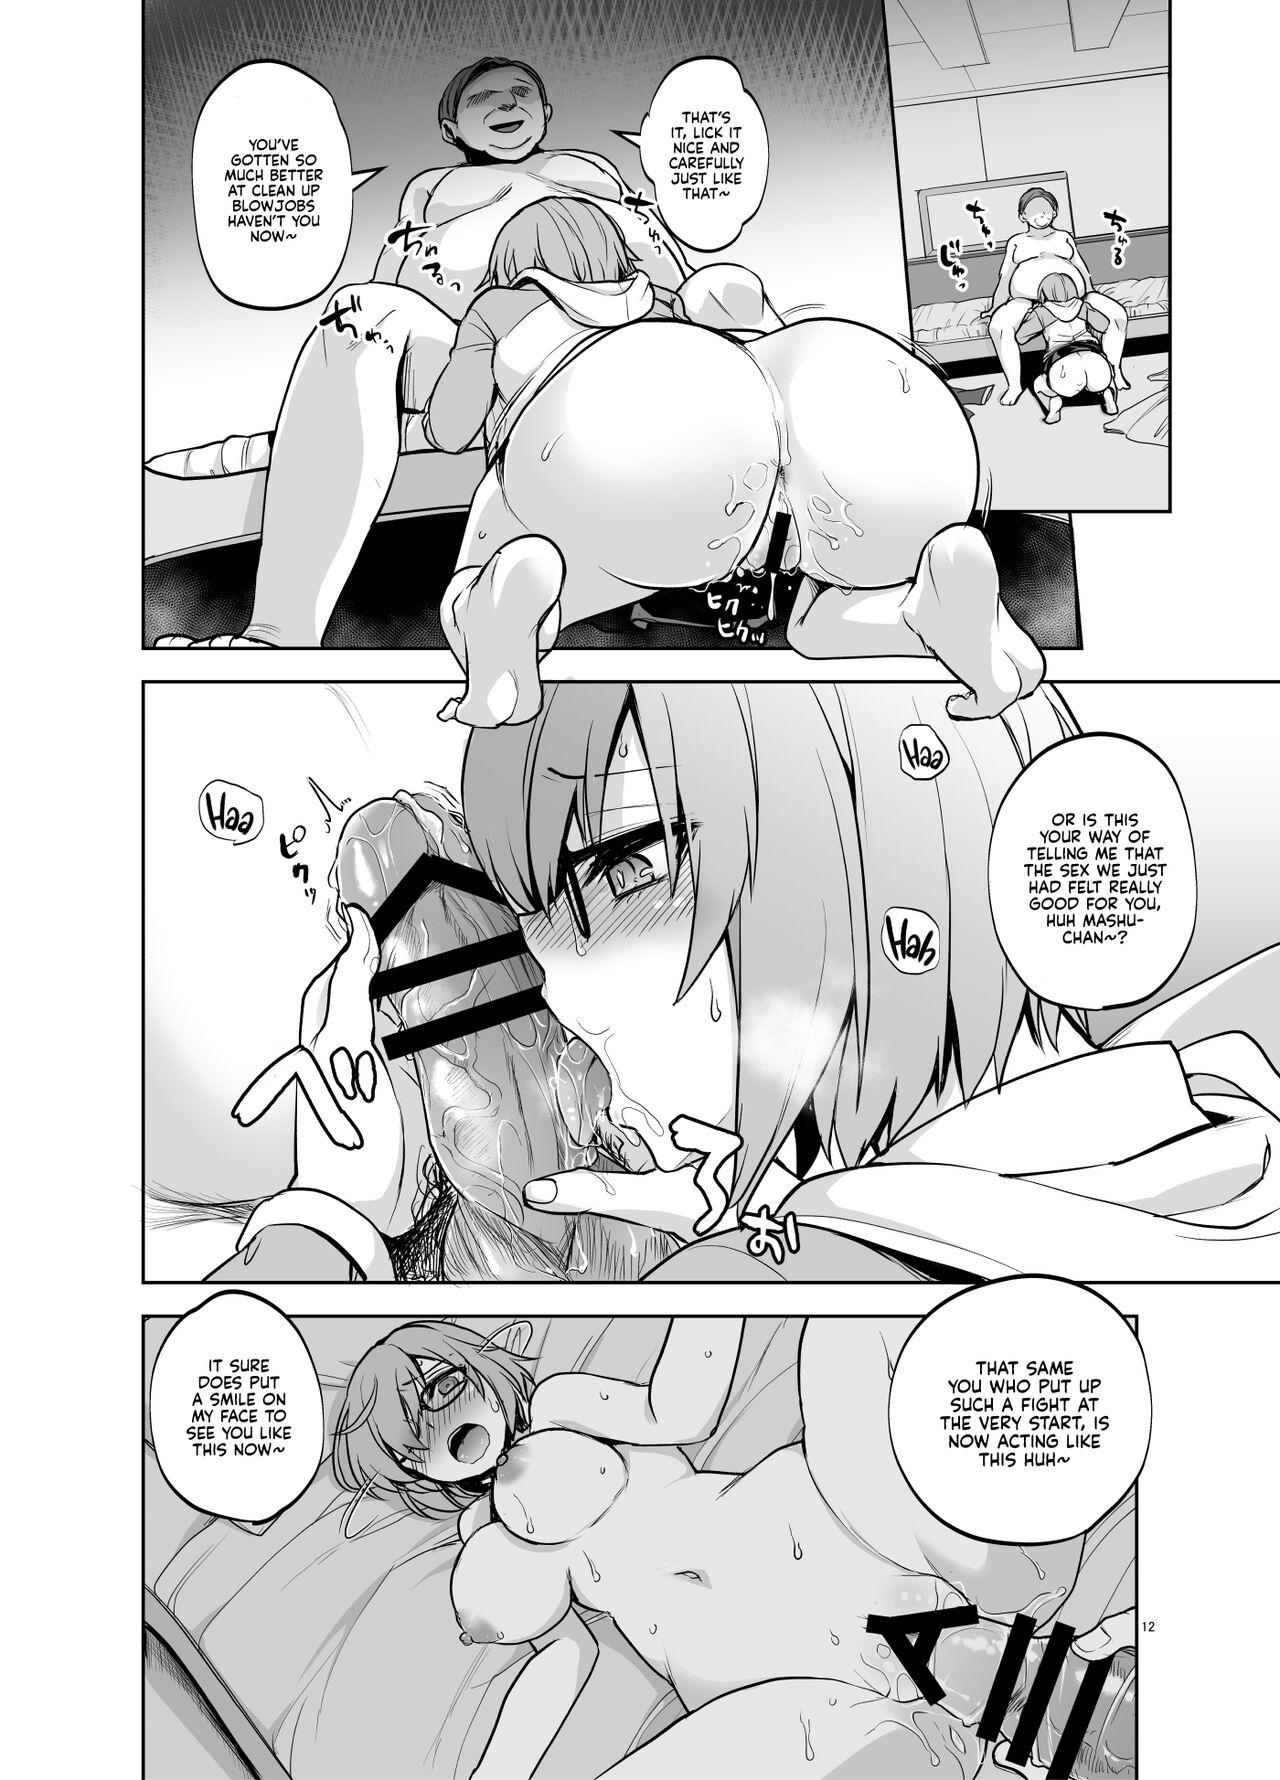 Spooning Mashu Must Deal with this Pushy n' Lusty Oji-san Whenever Senpai is Busy Rayshifting! - Fate grand order Soloboy - Page 11